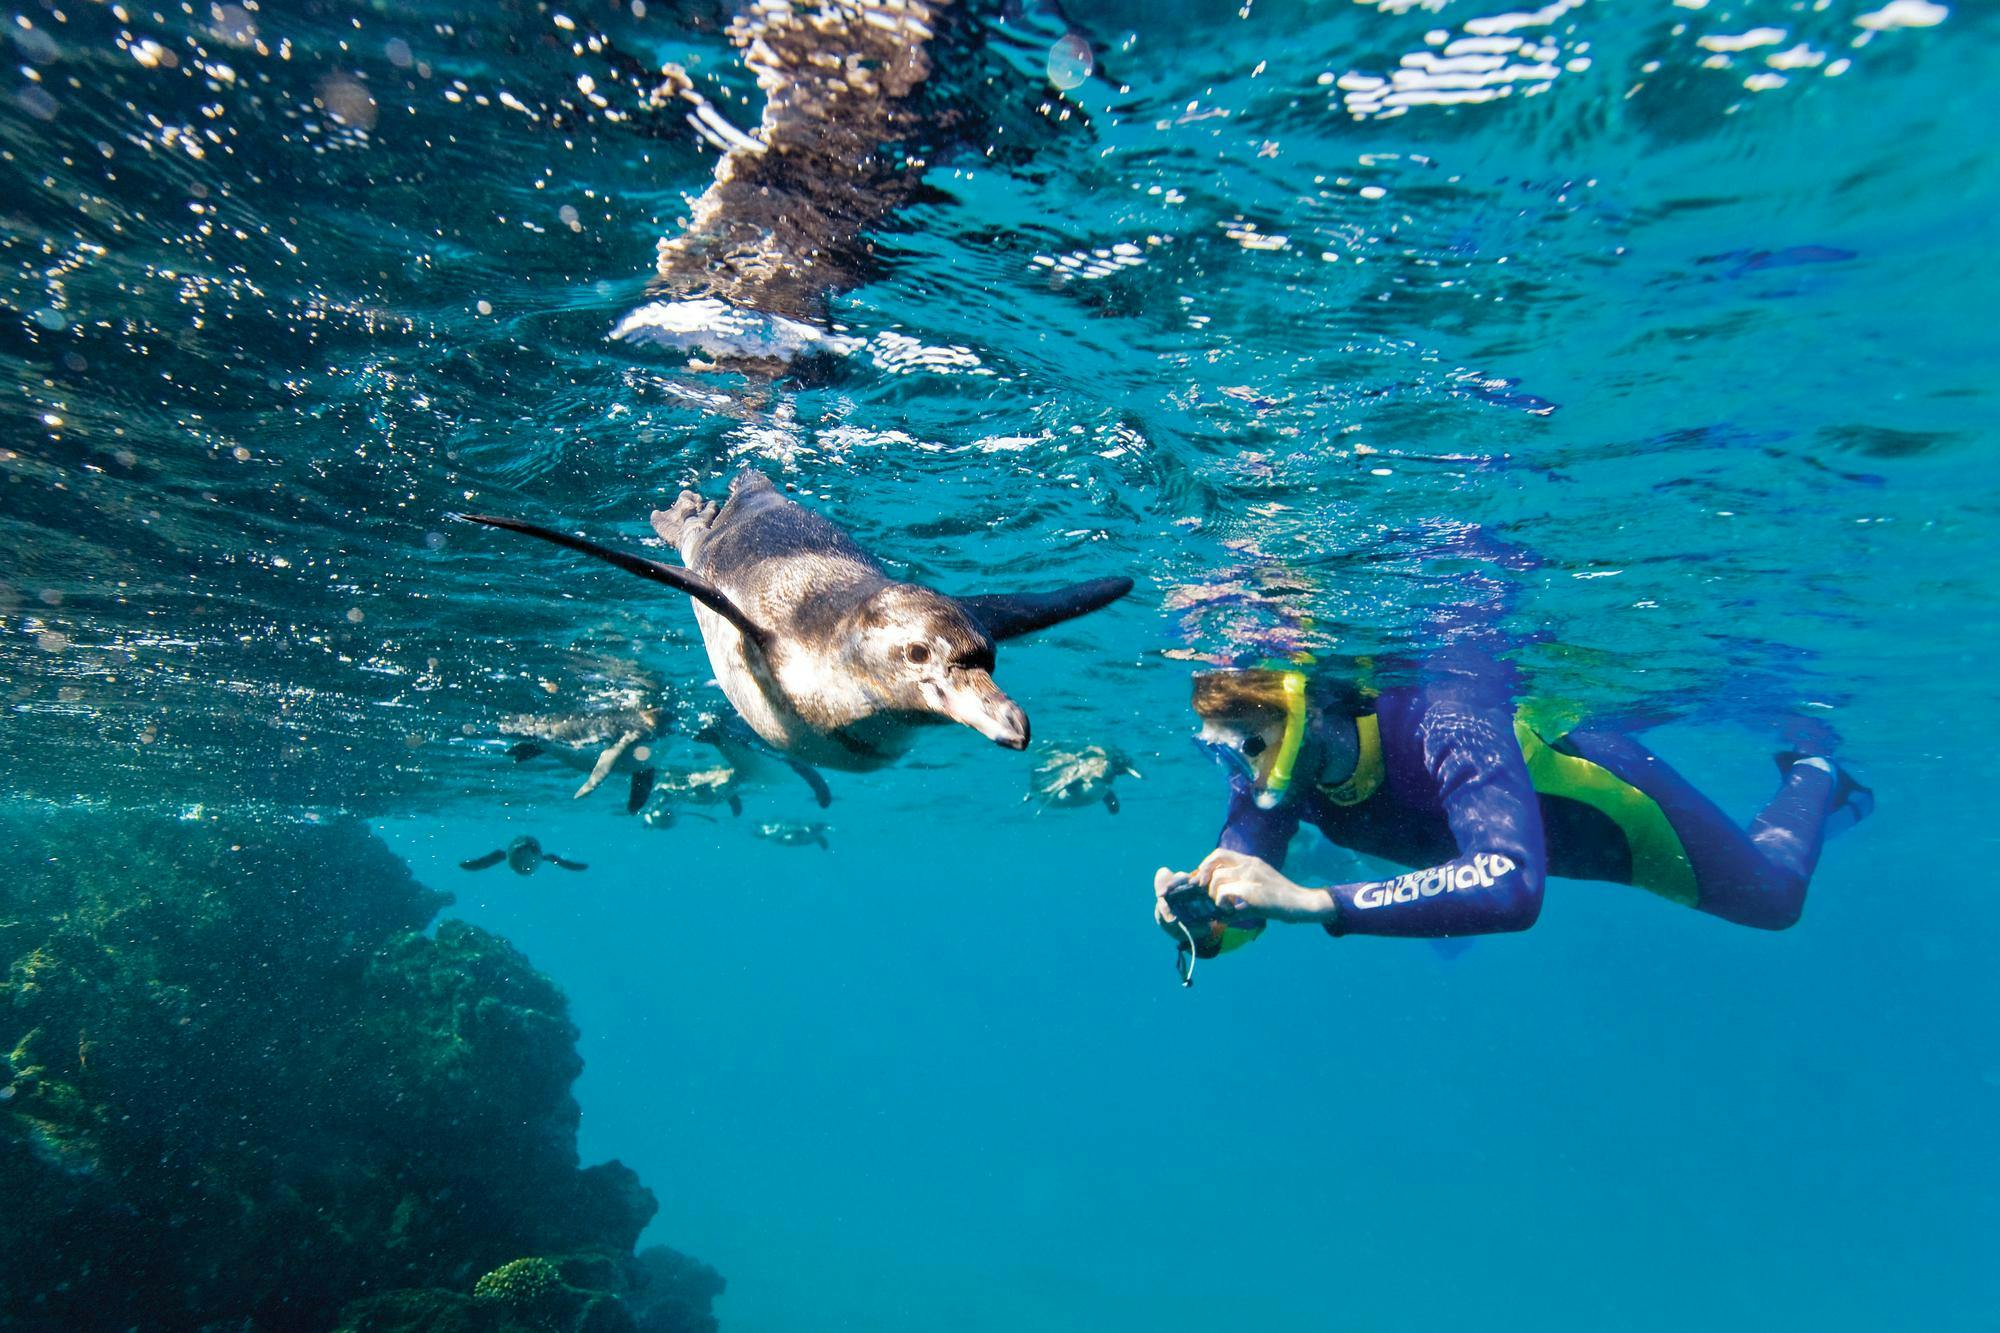 Adult Galapagos penguin hunting fish underwater as a guest snorkels and photographs his activity in Galapagos Islands, Ecuador